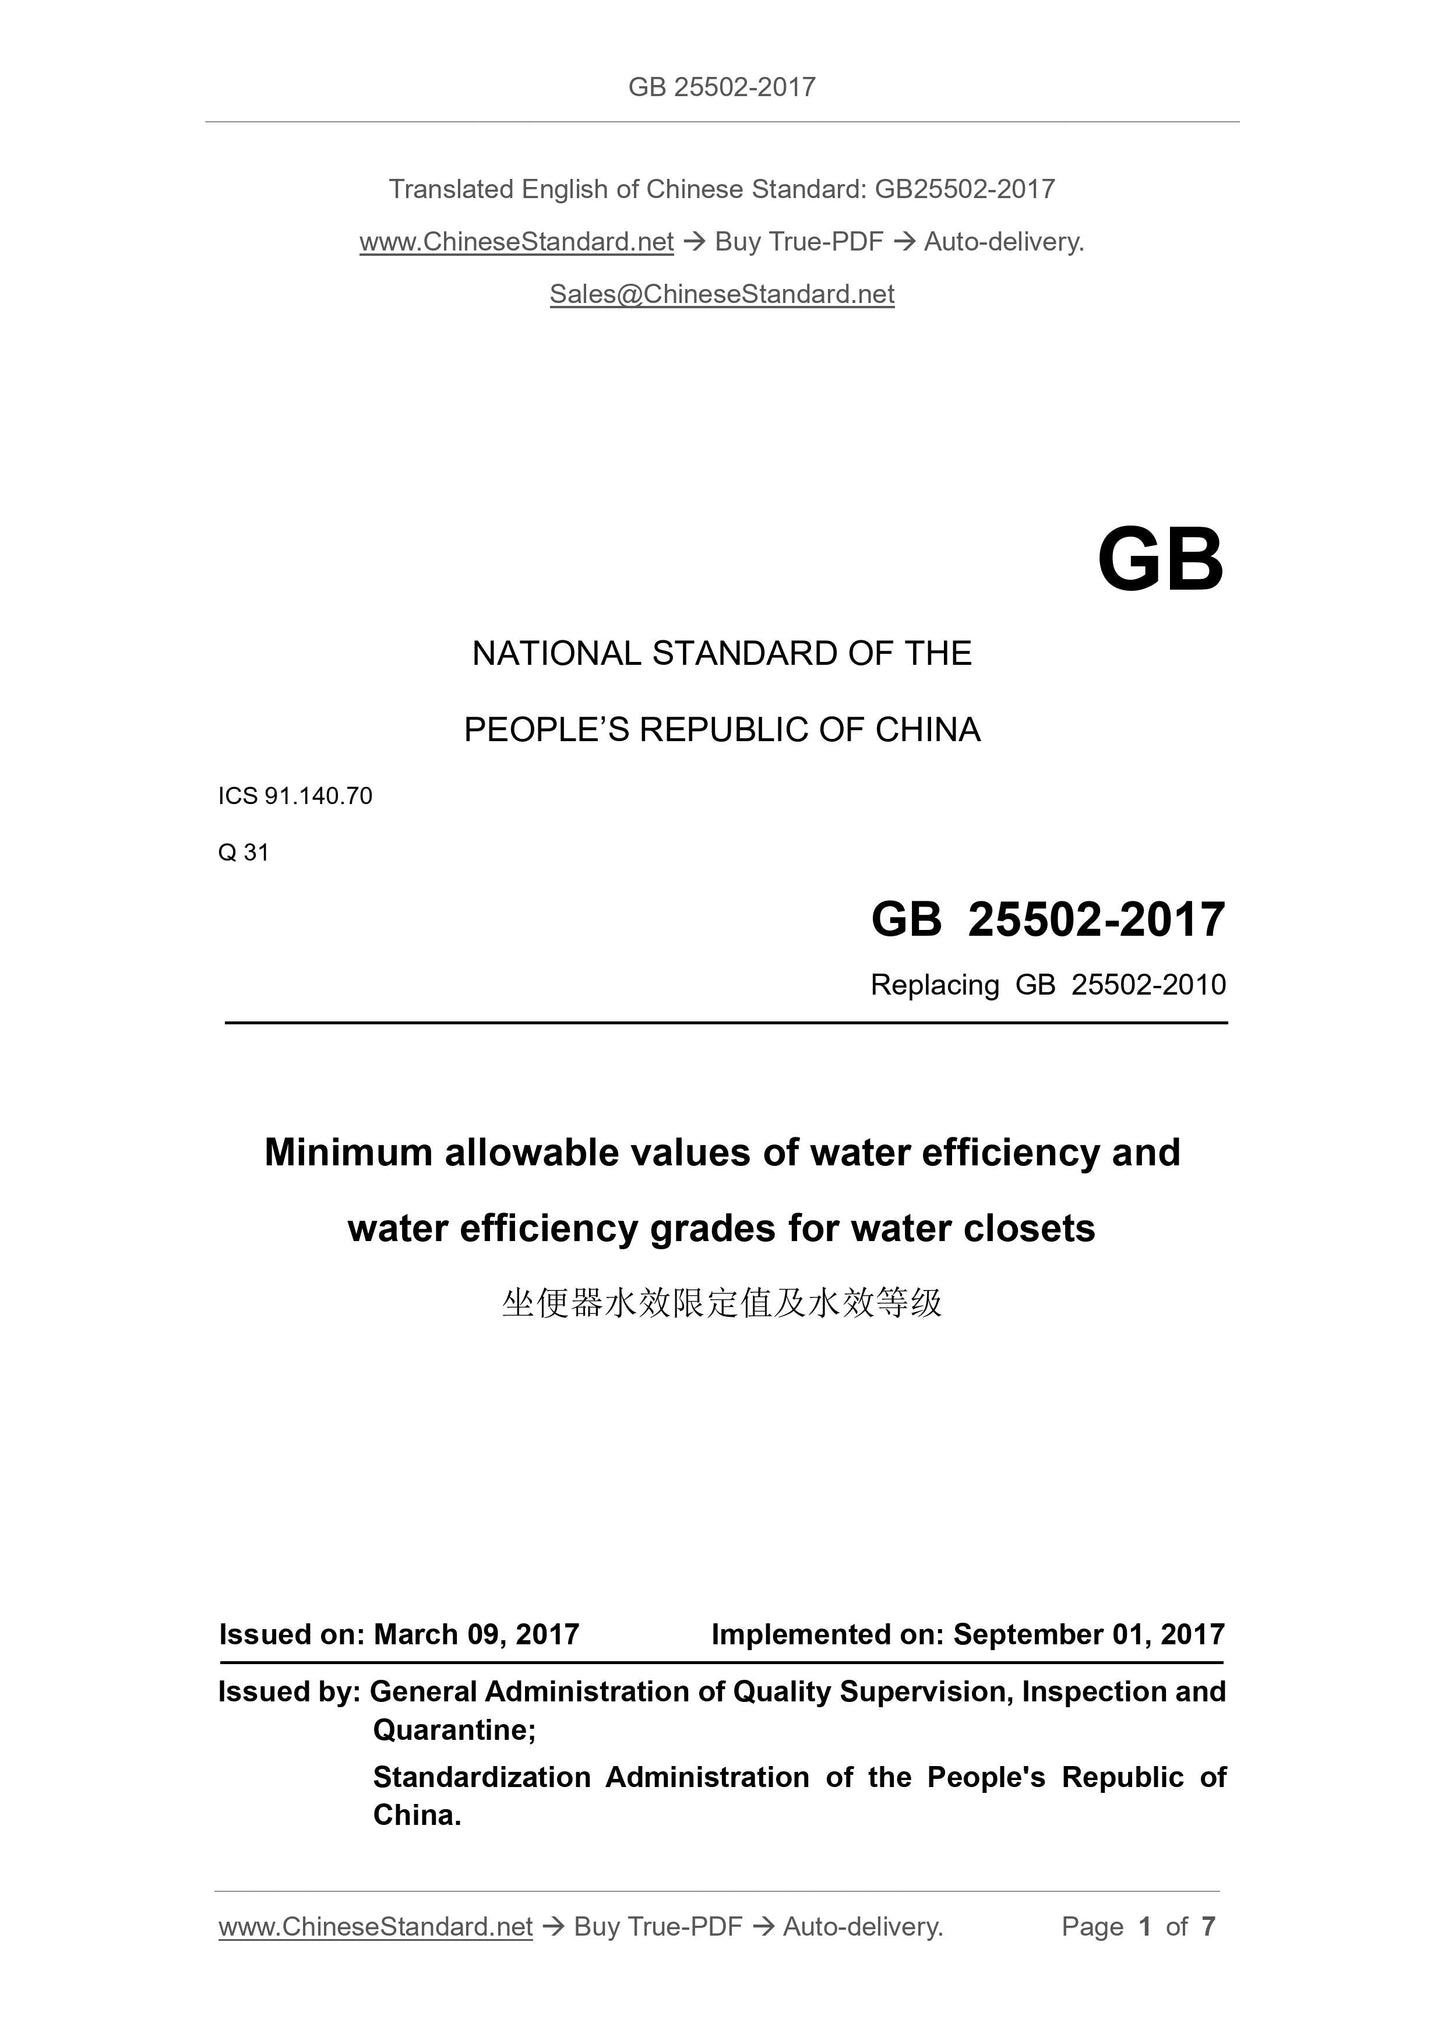 GB 25502-2017 Page 1